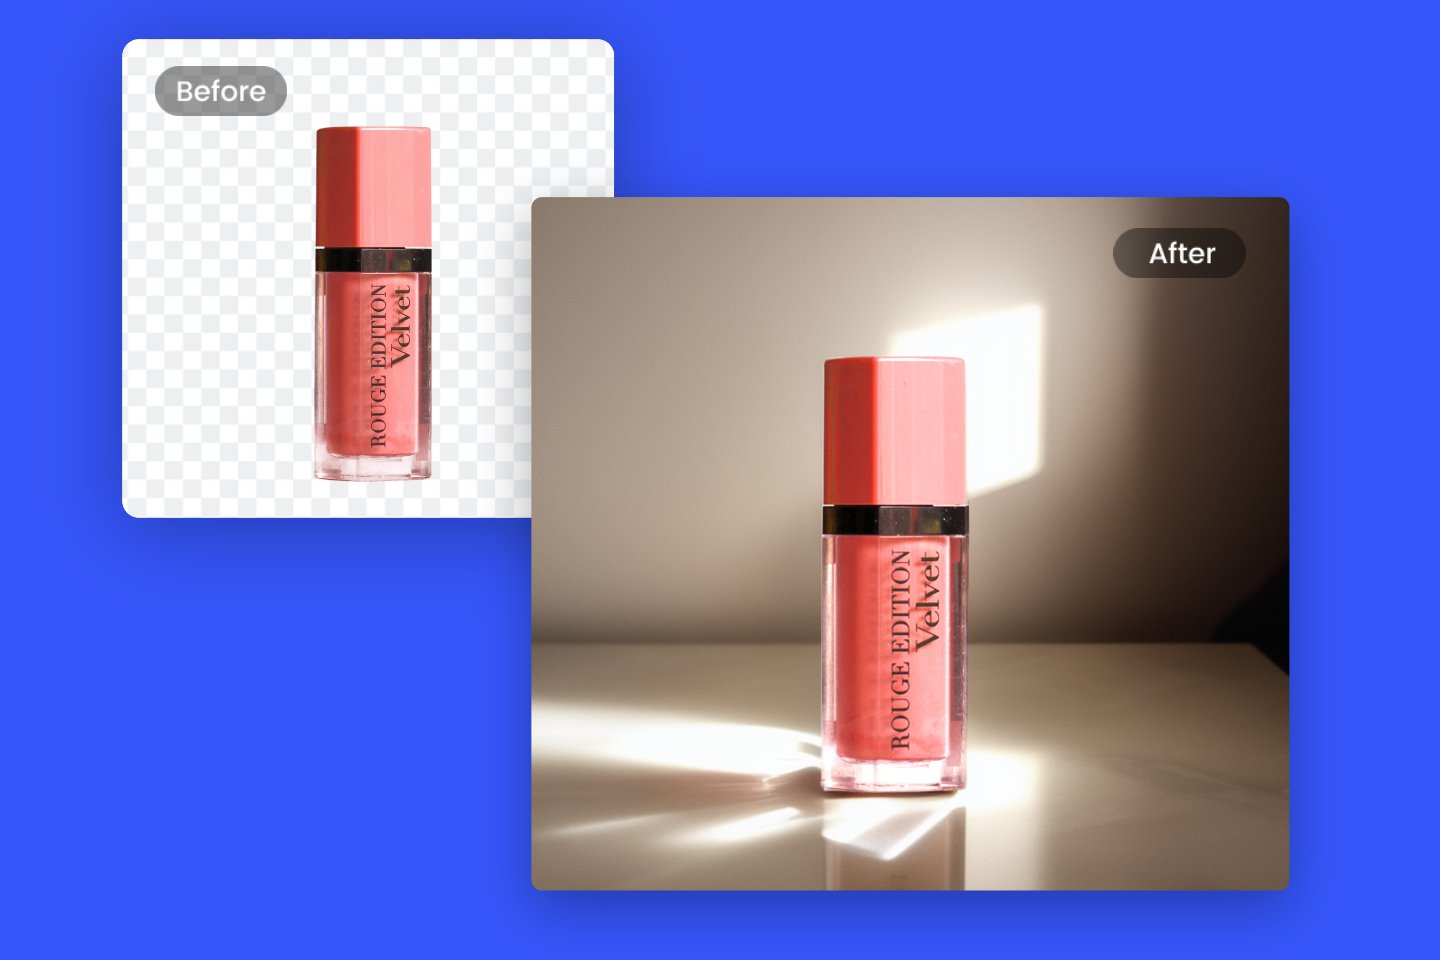 Add a realistic background generated by AI to a lipstick image